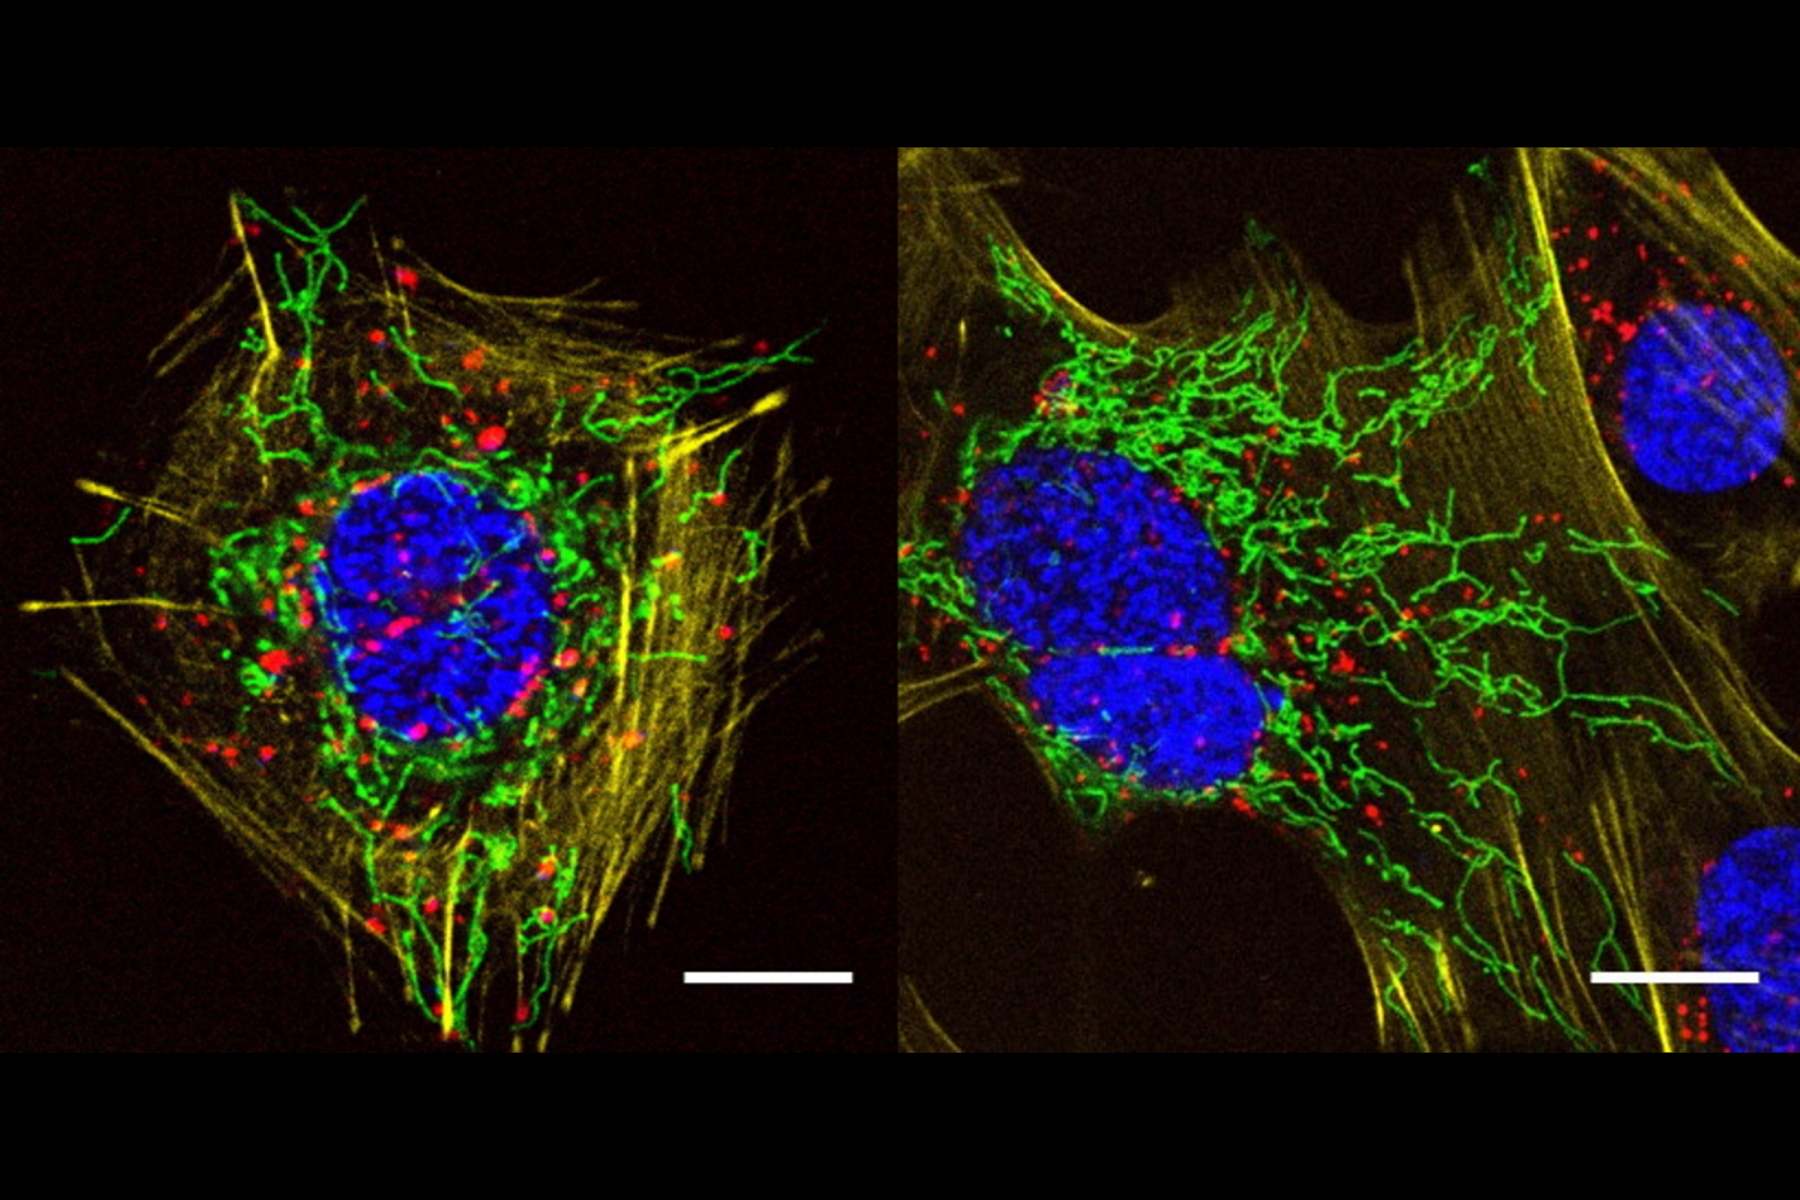 Live cells incubated with R110-SNMe2 (green), TMR-actin (yellow), SiRr-lysosome (red), and Hoechst (blue), imaged directly without any washing steps. Scale bar: 10 μm. Images courtesy: Lu Wang, Kai Johnsson, MPI-MF, Heidelberg.